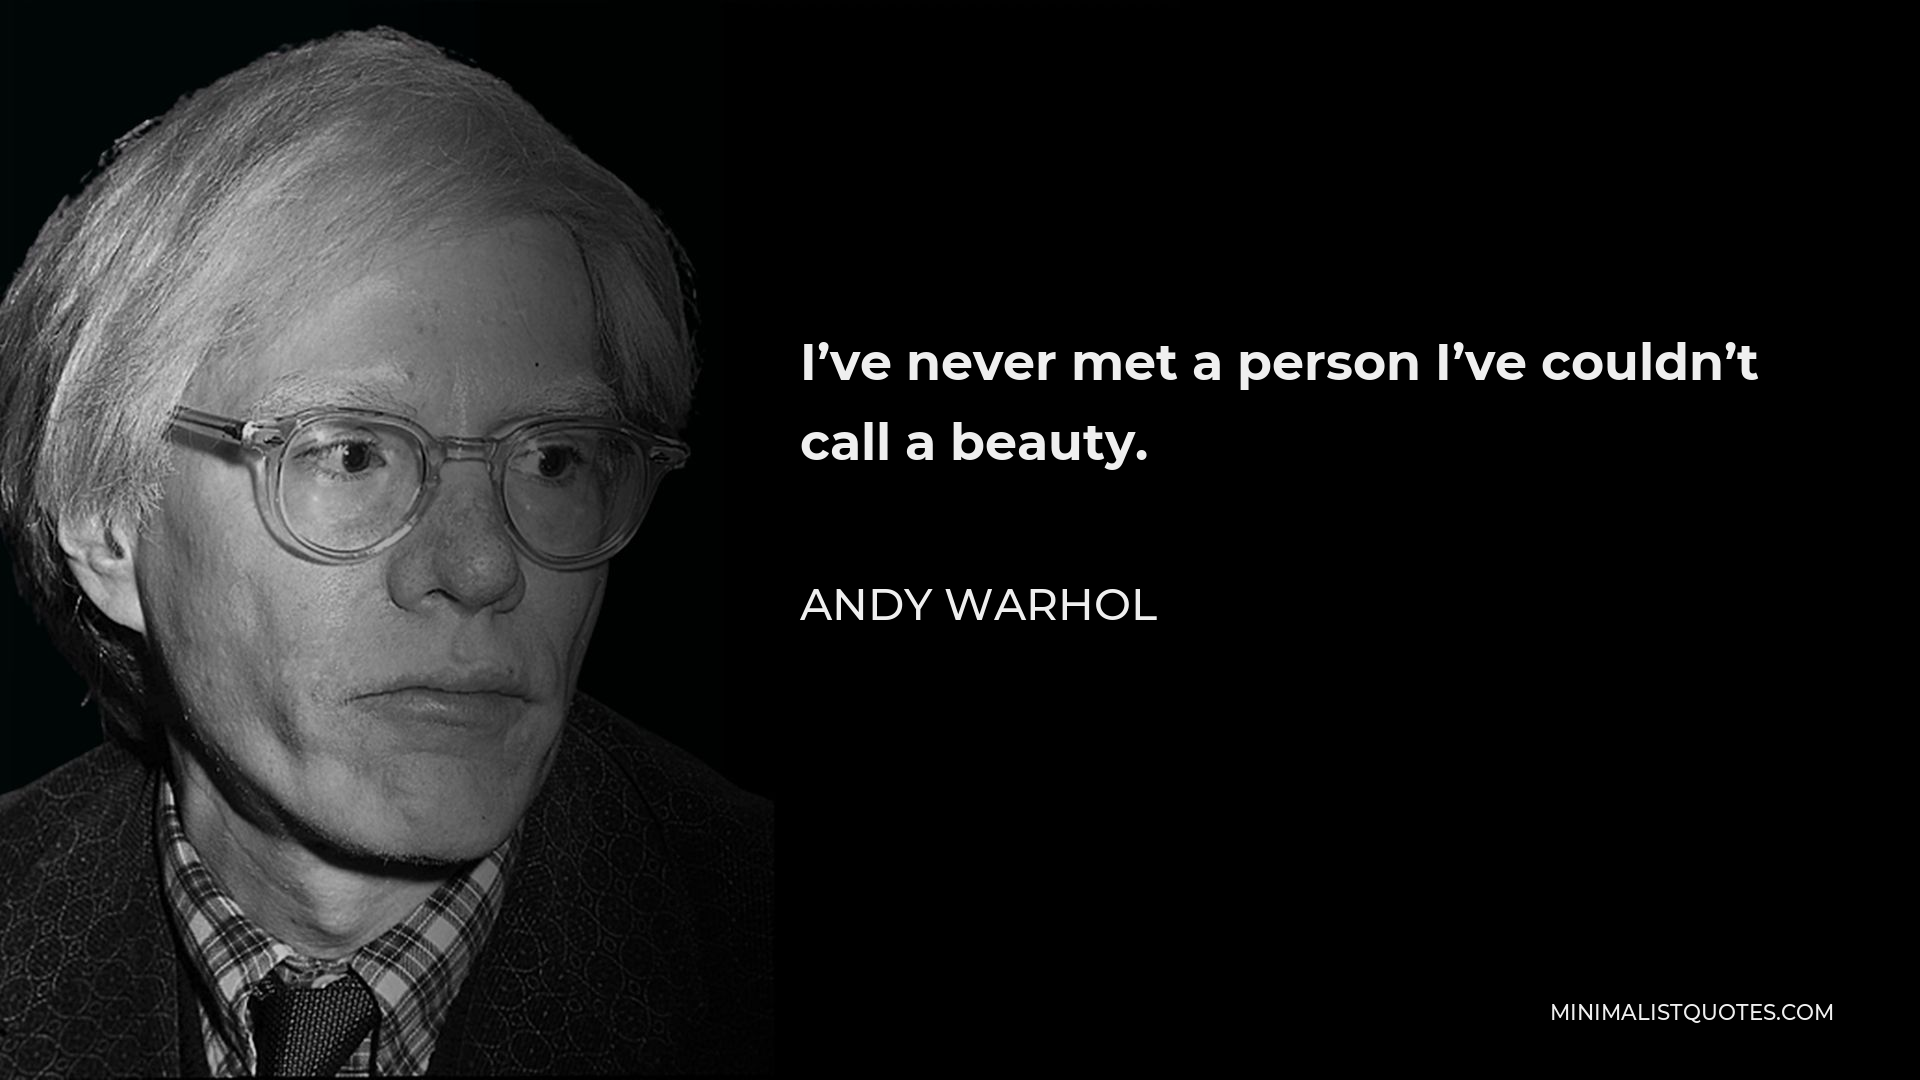 Andy Warhol Quote - I’ve never met a person I’ve couldn’t call a beauty.